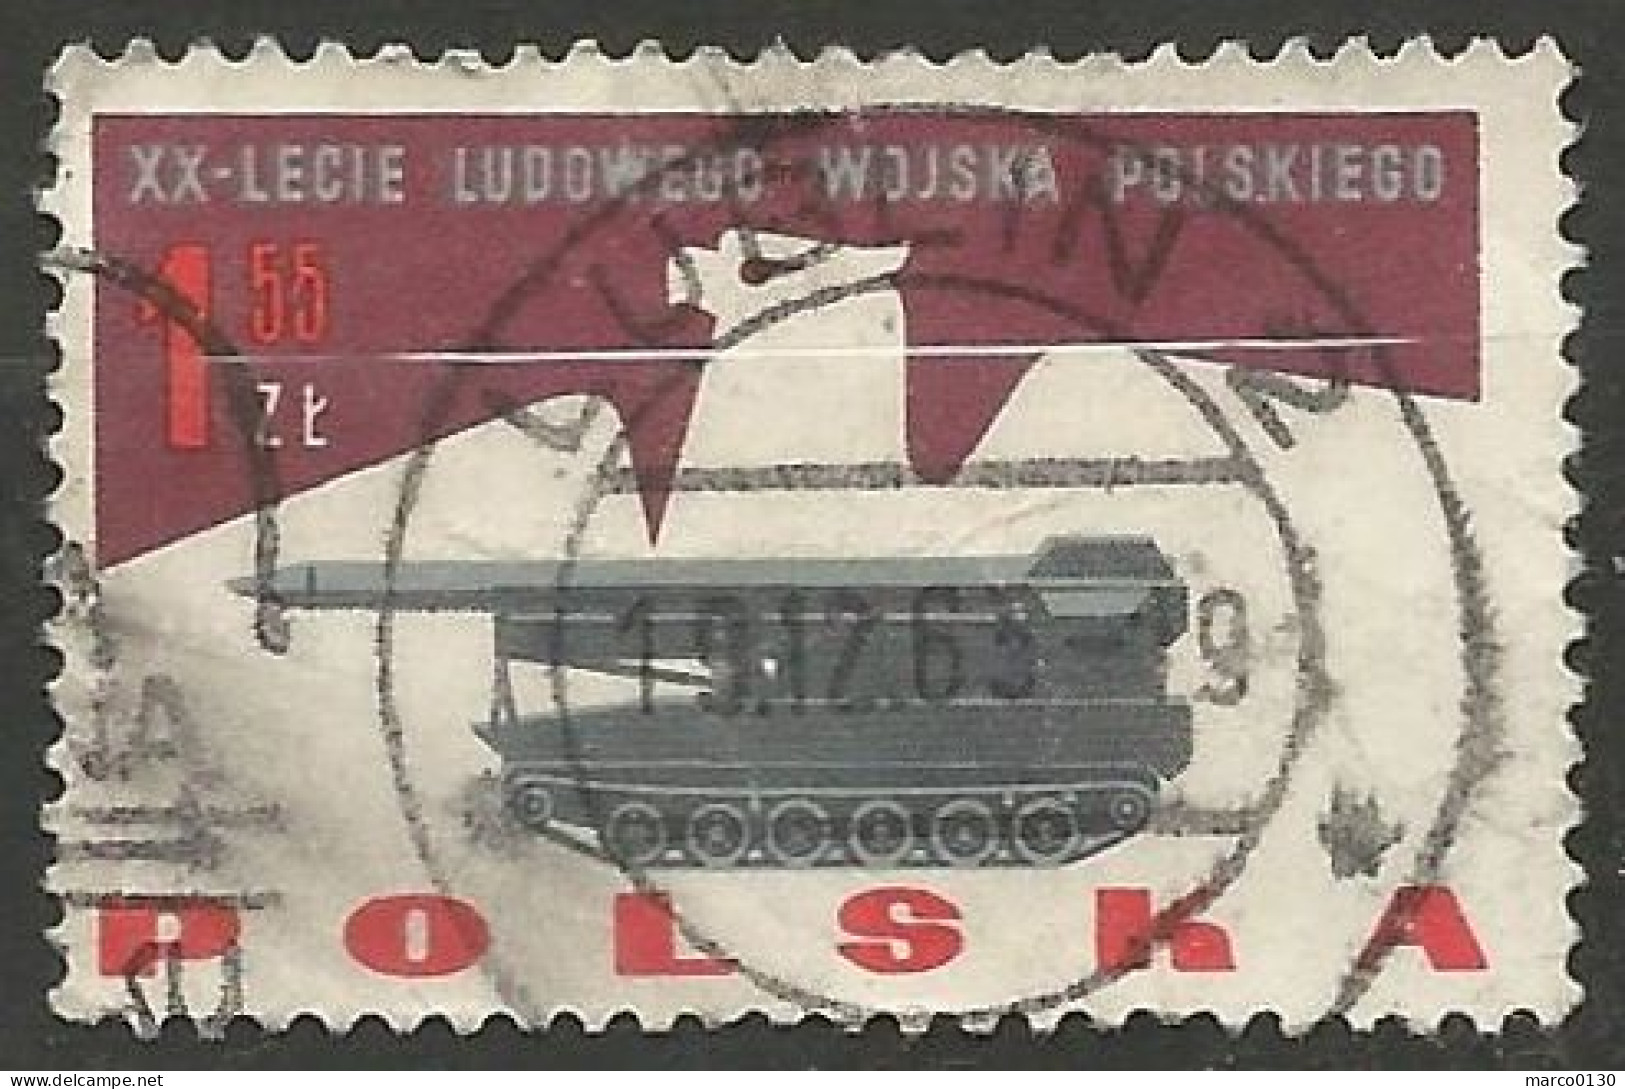 POLOGNE N° 1295 OBLITERE - Used Stamps